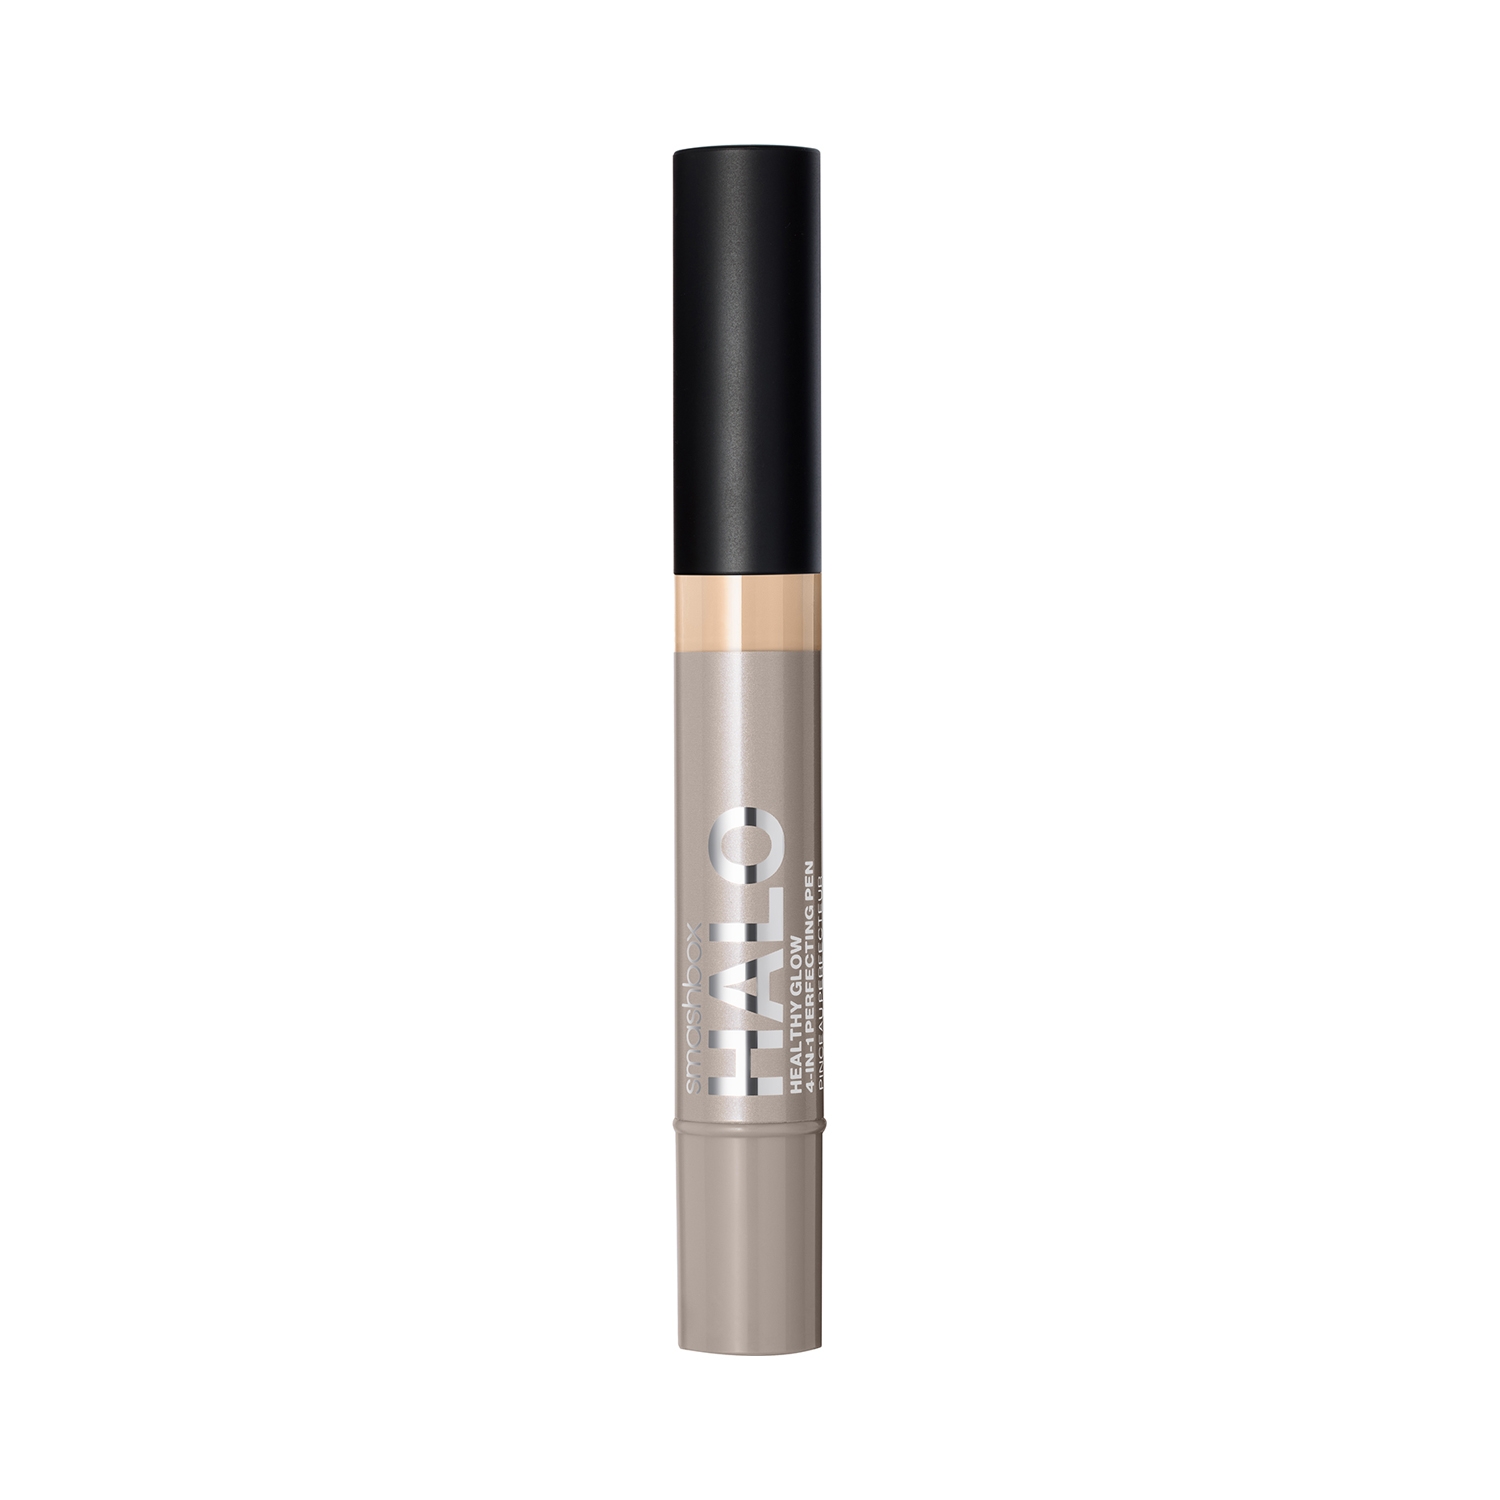 Smashbox | Smashbox Halo Healthy Glow 4-In-1 Perfecting Concealer Pen - L10N (3.5ml)